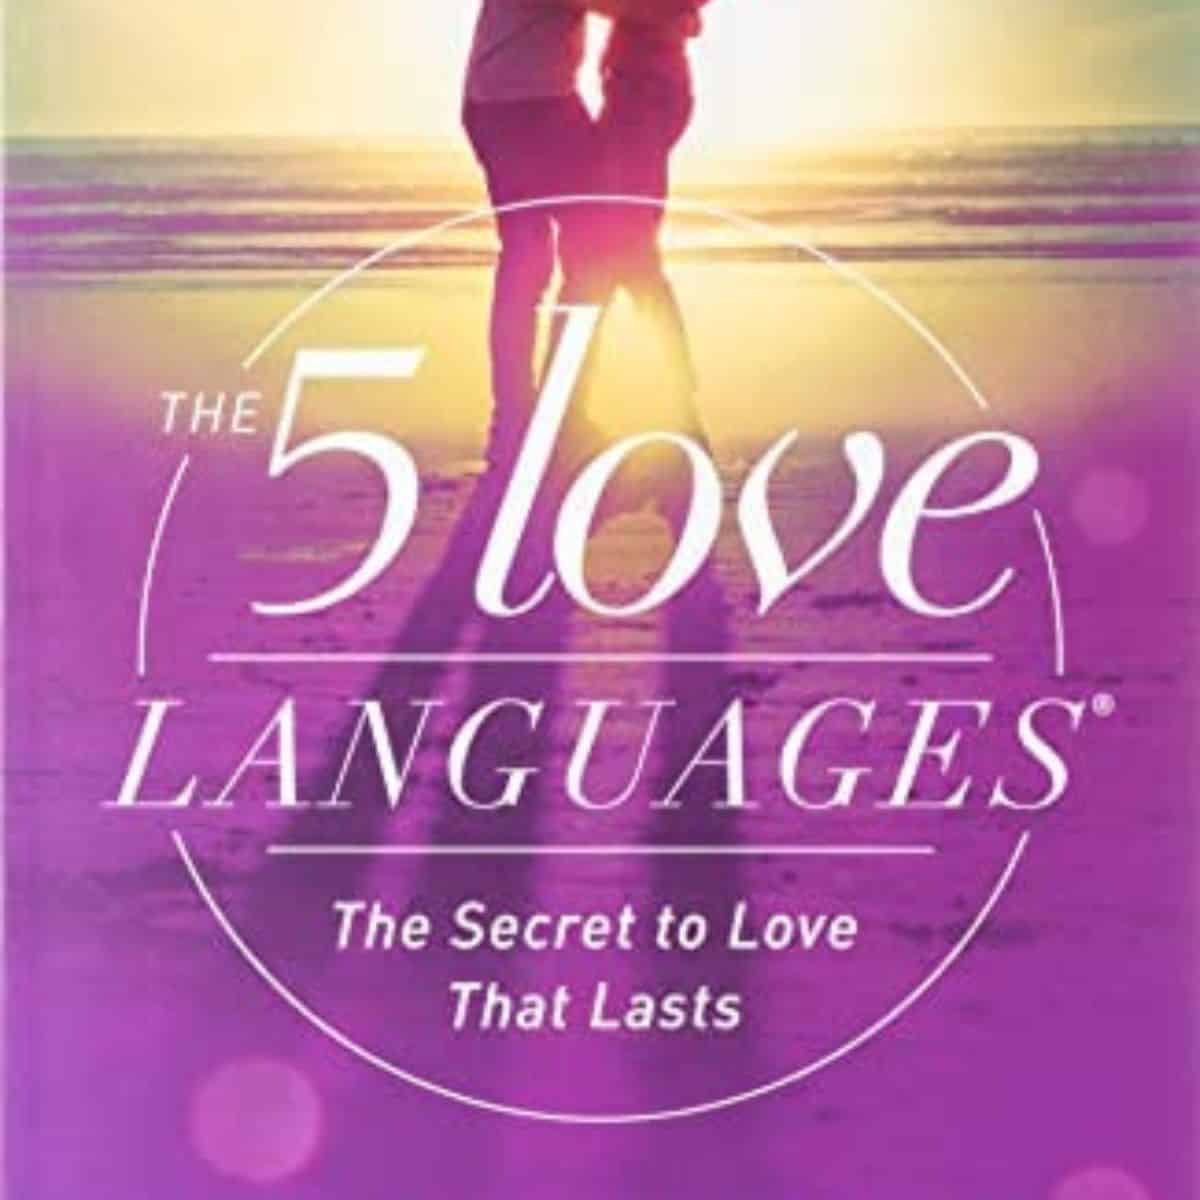 Review of The 5 Love Languages by Gary Chapman (+ Free Quiz)